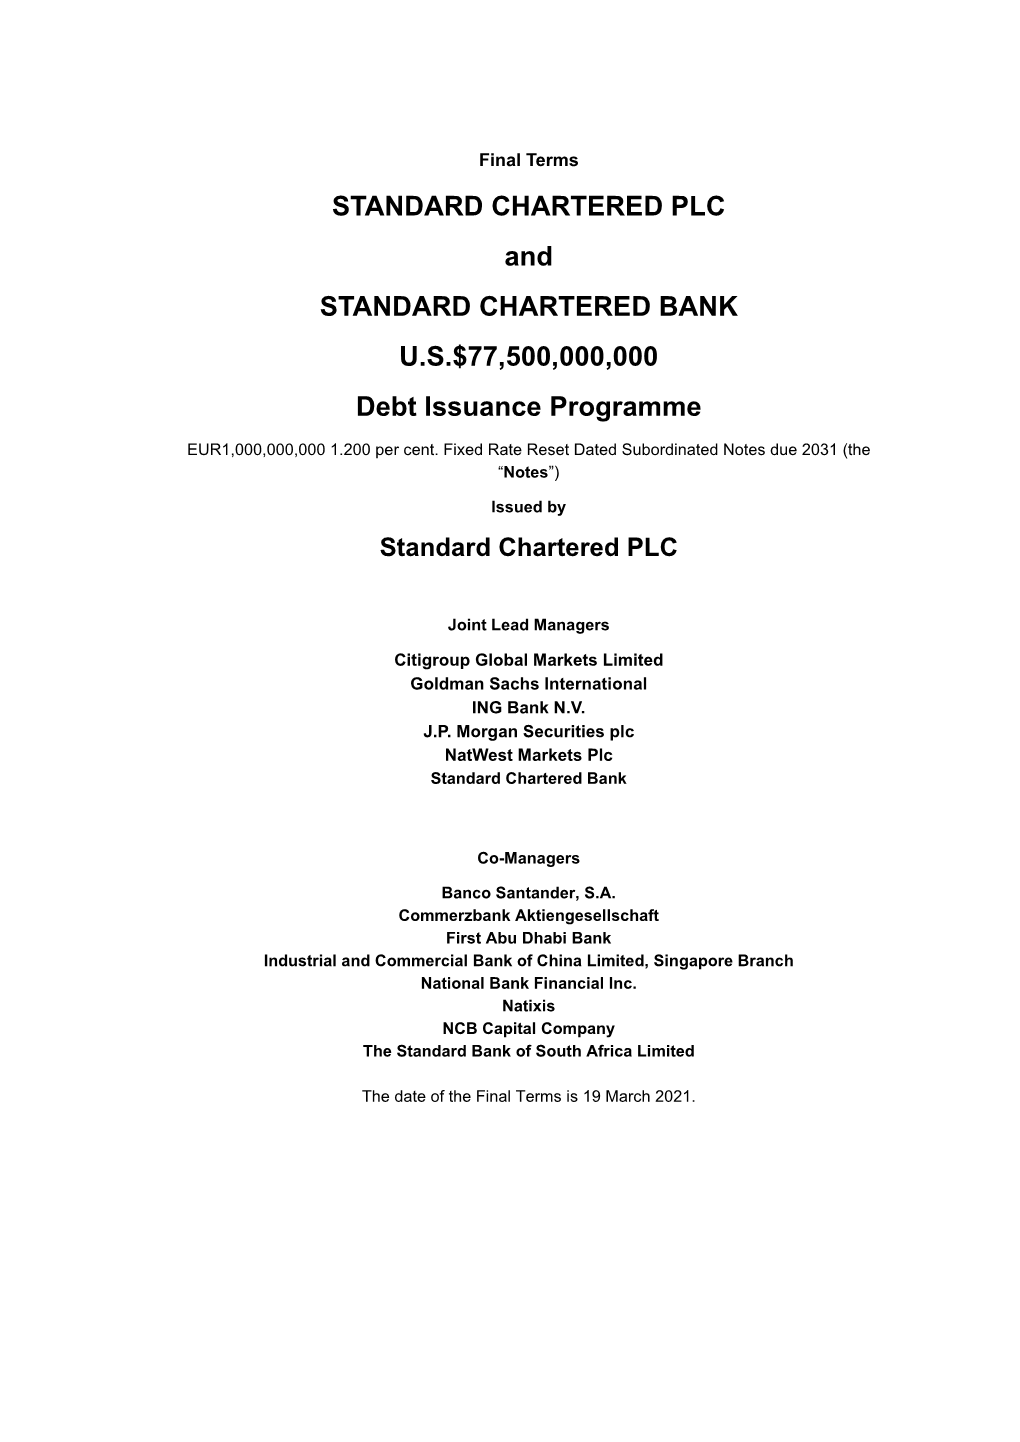 STANDARD CHARTERED PLC and STANDARD CHARTERED BANK U.S.$77,500,000,000 Debt Issuance Programme